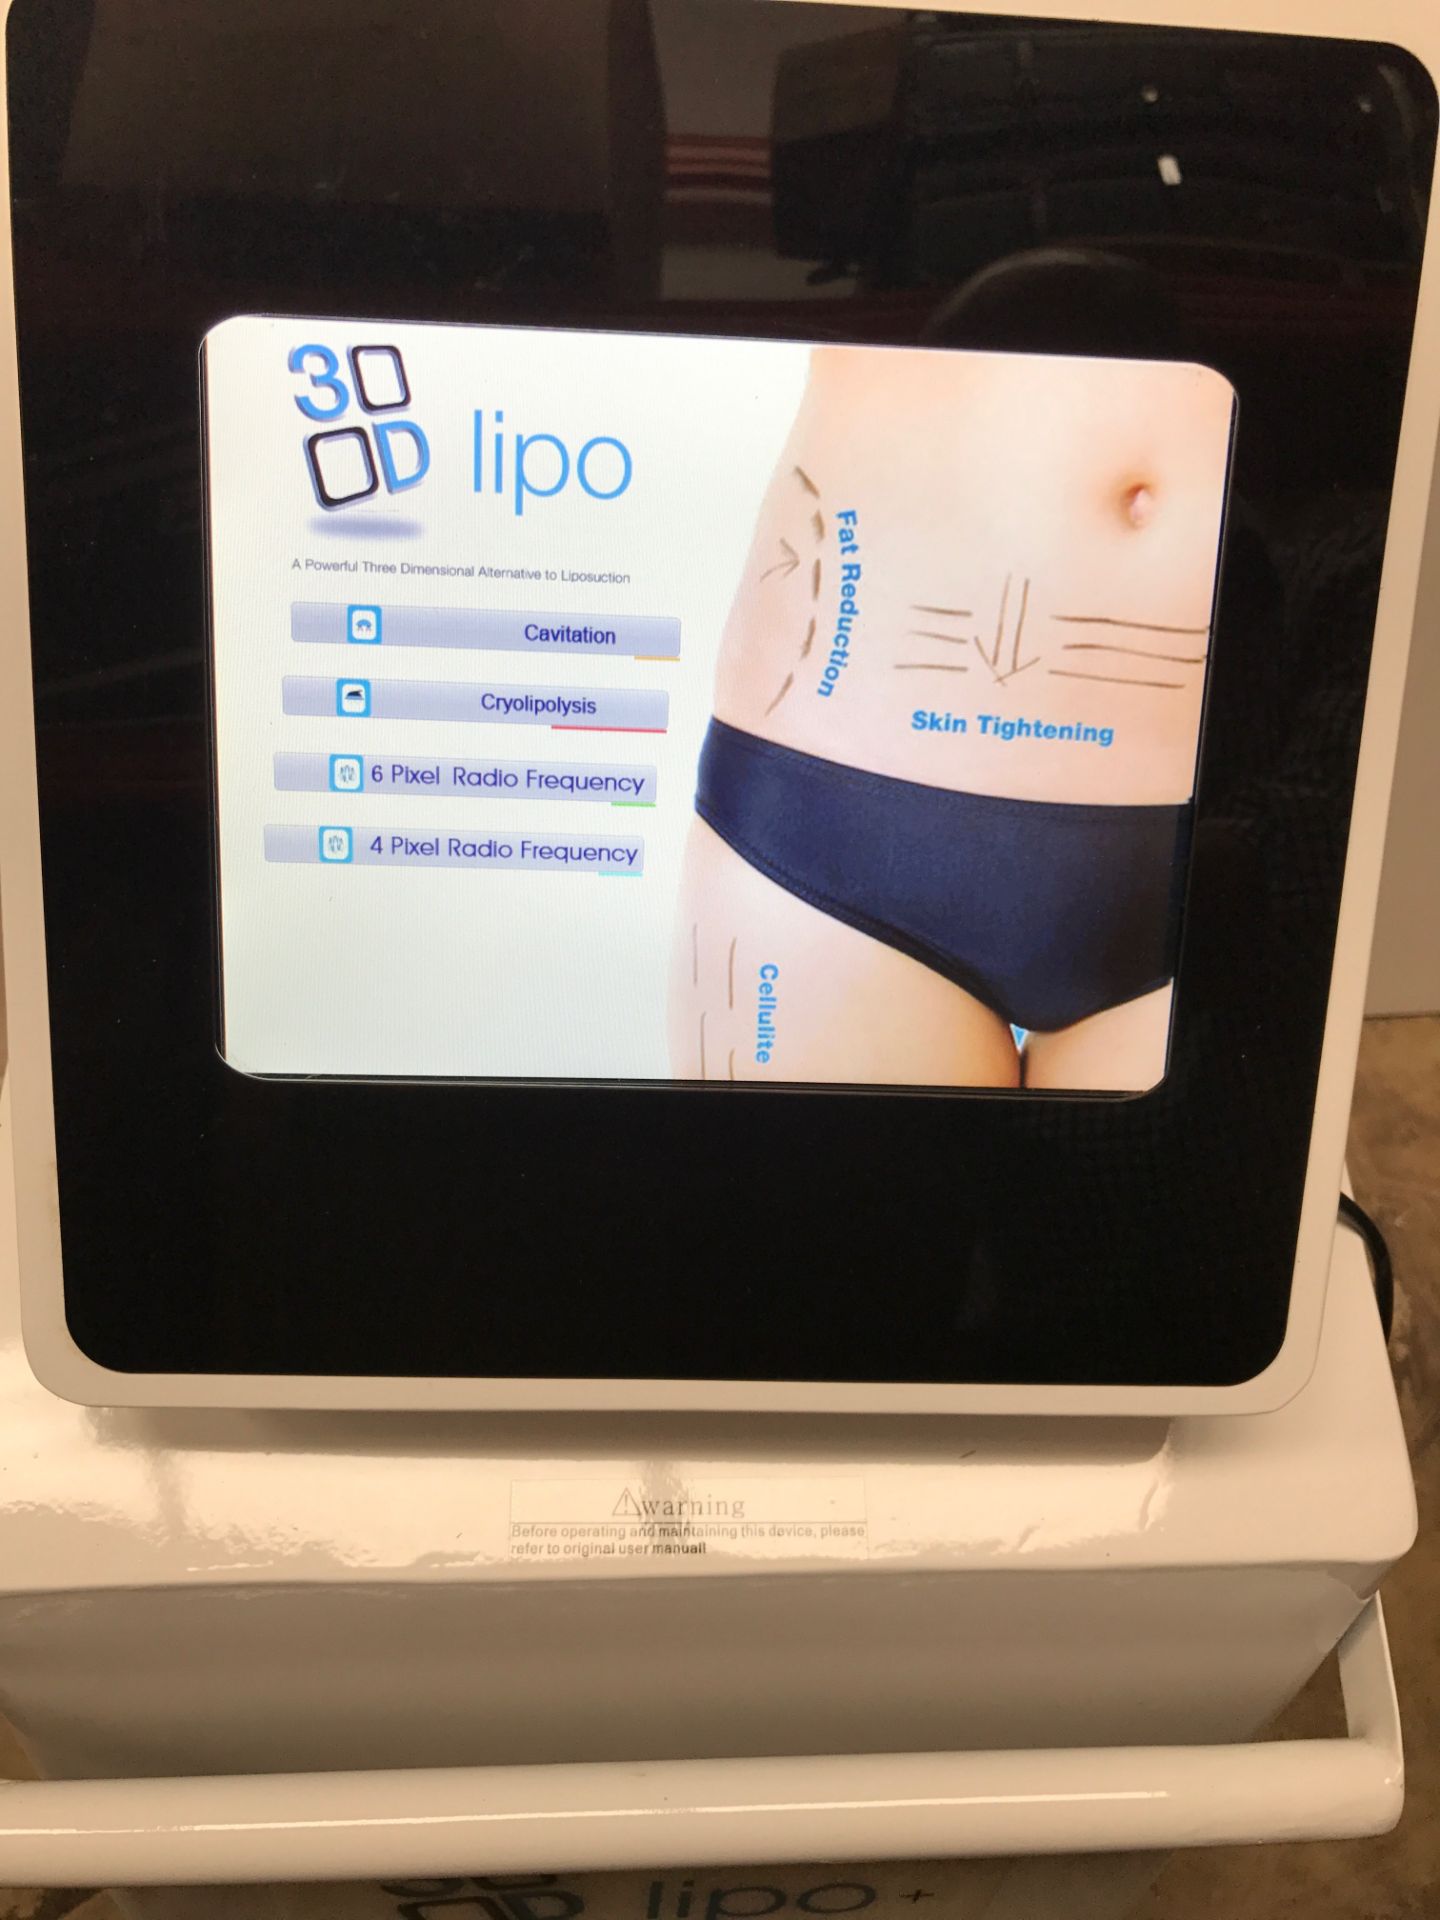 3D Lipo Machine - Lipomed - A powerful Three Dimensional Alternative to Liposuction - Image 2 of 16